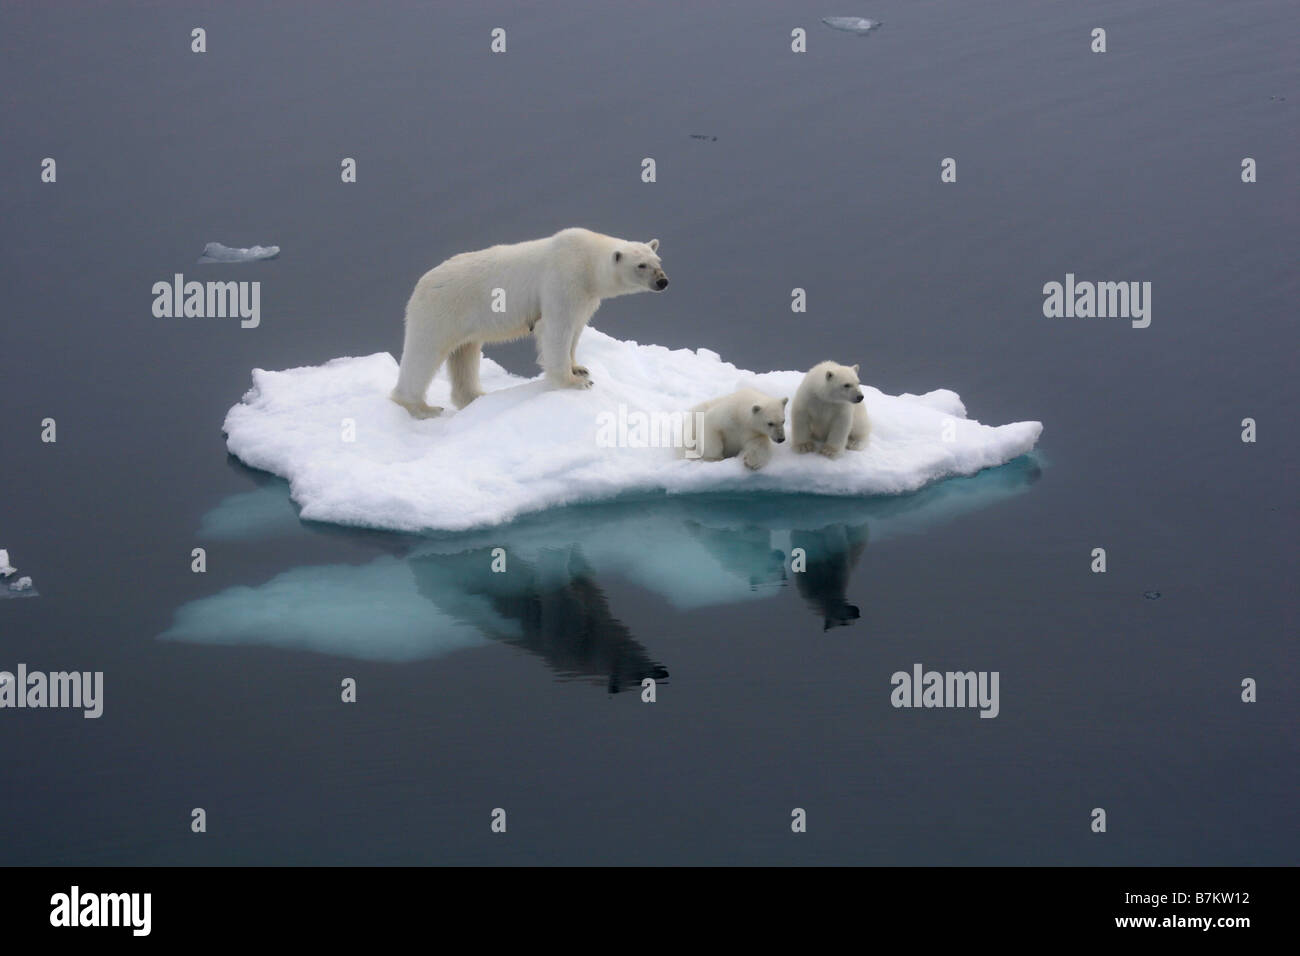 Polar bear and 2 small cubs on small ice floe, looking into the distance.  Ice floe sits on still arctic ocean. Stock Photo